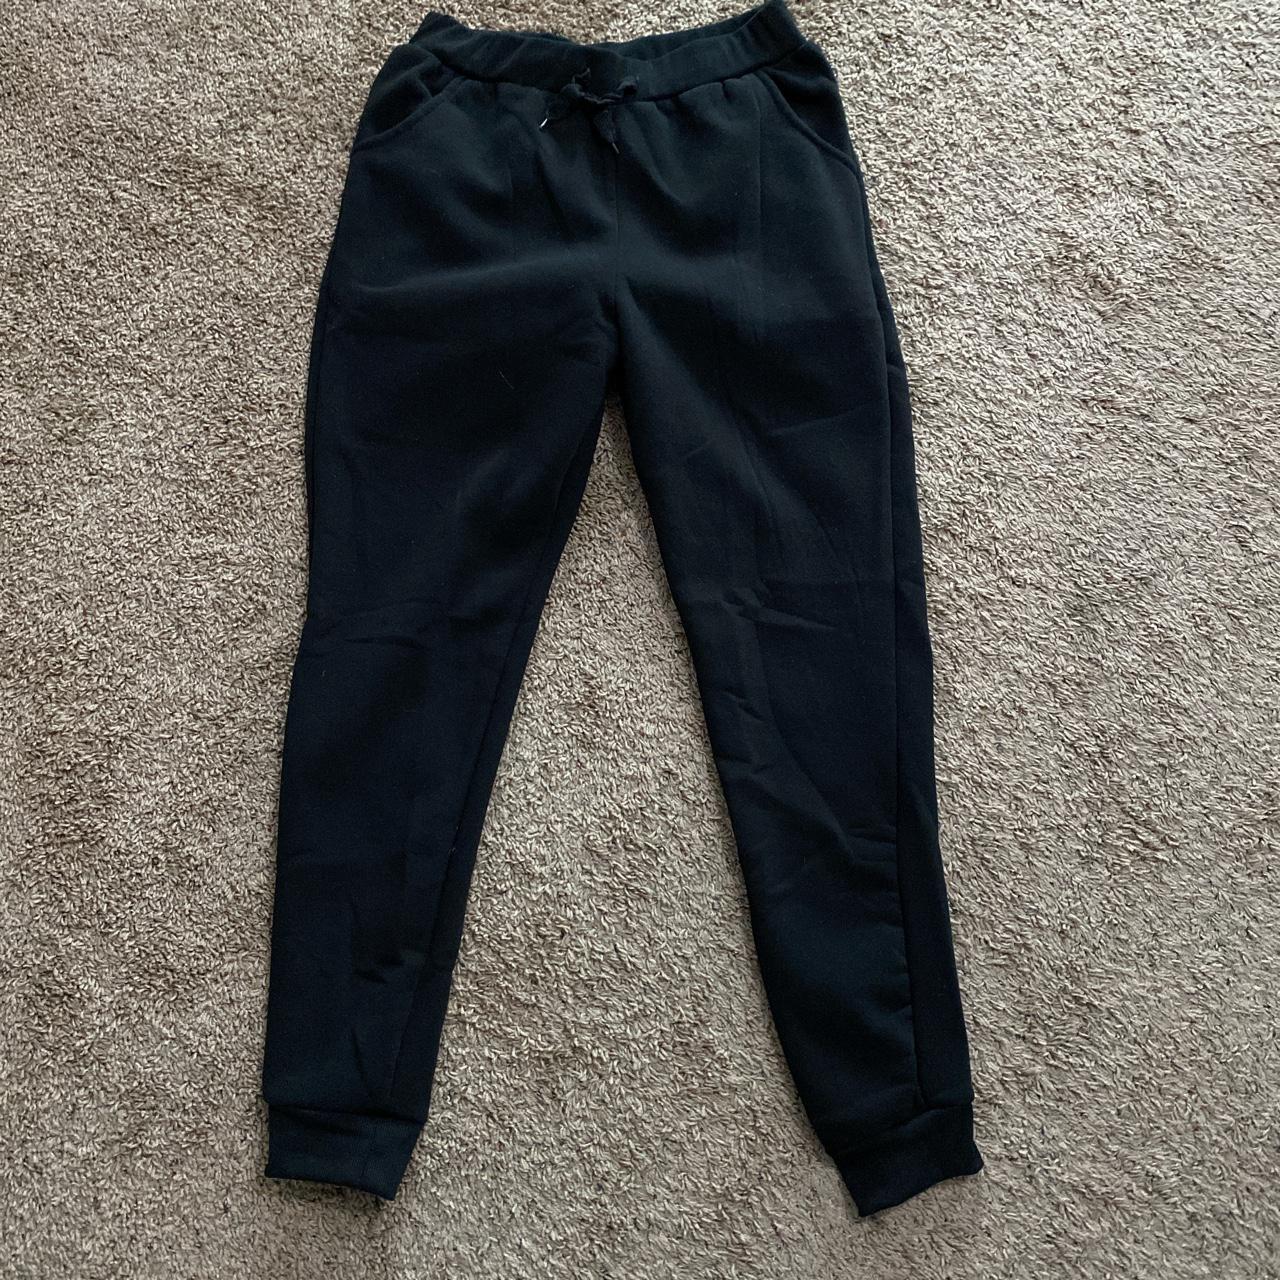 Black heavy weight sweatpants with cuffed ankles,... - Depop